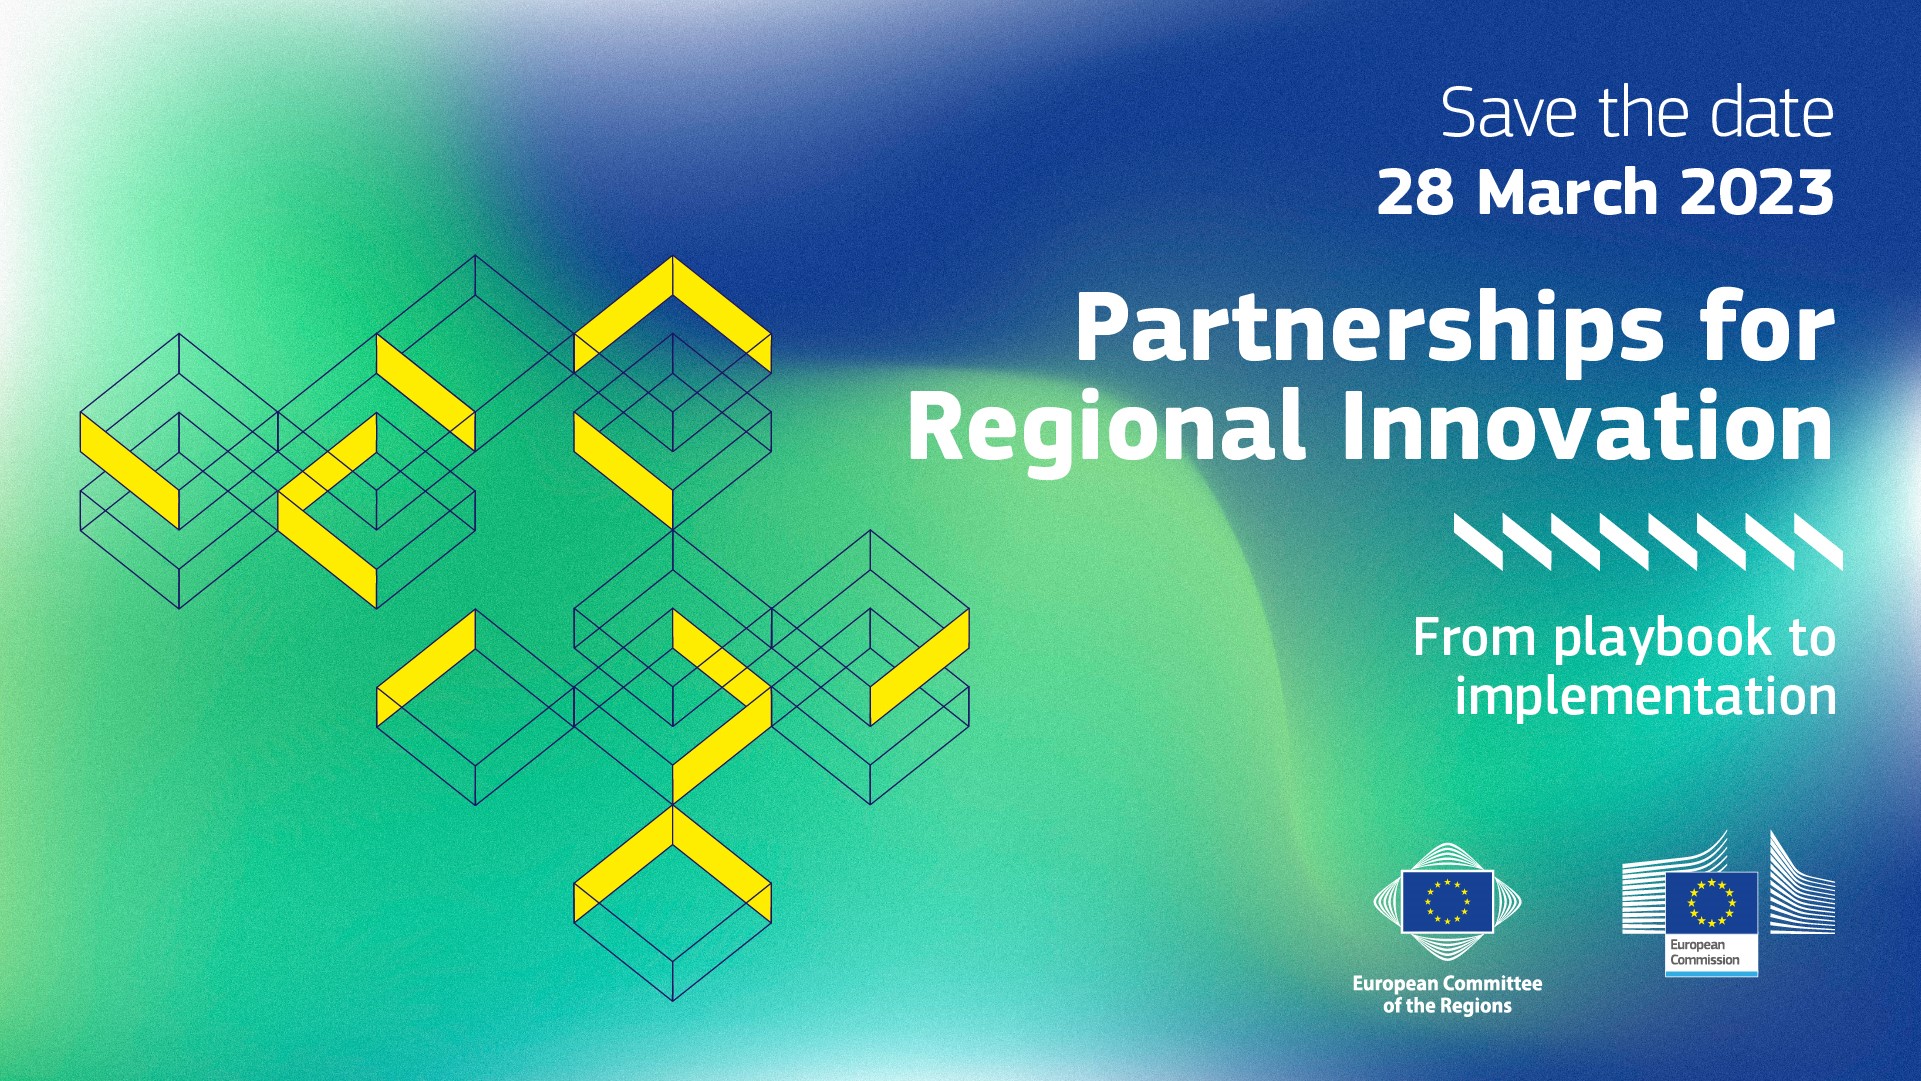 Banner of Save the date for Conference "Partnerships for Regional Innovation"